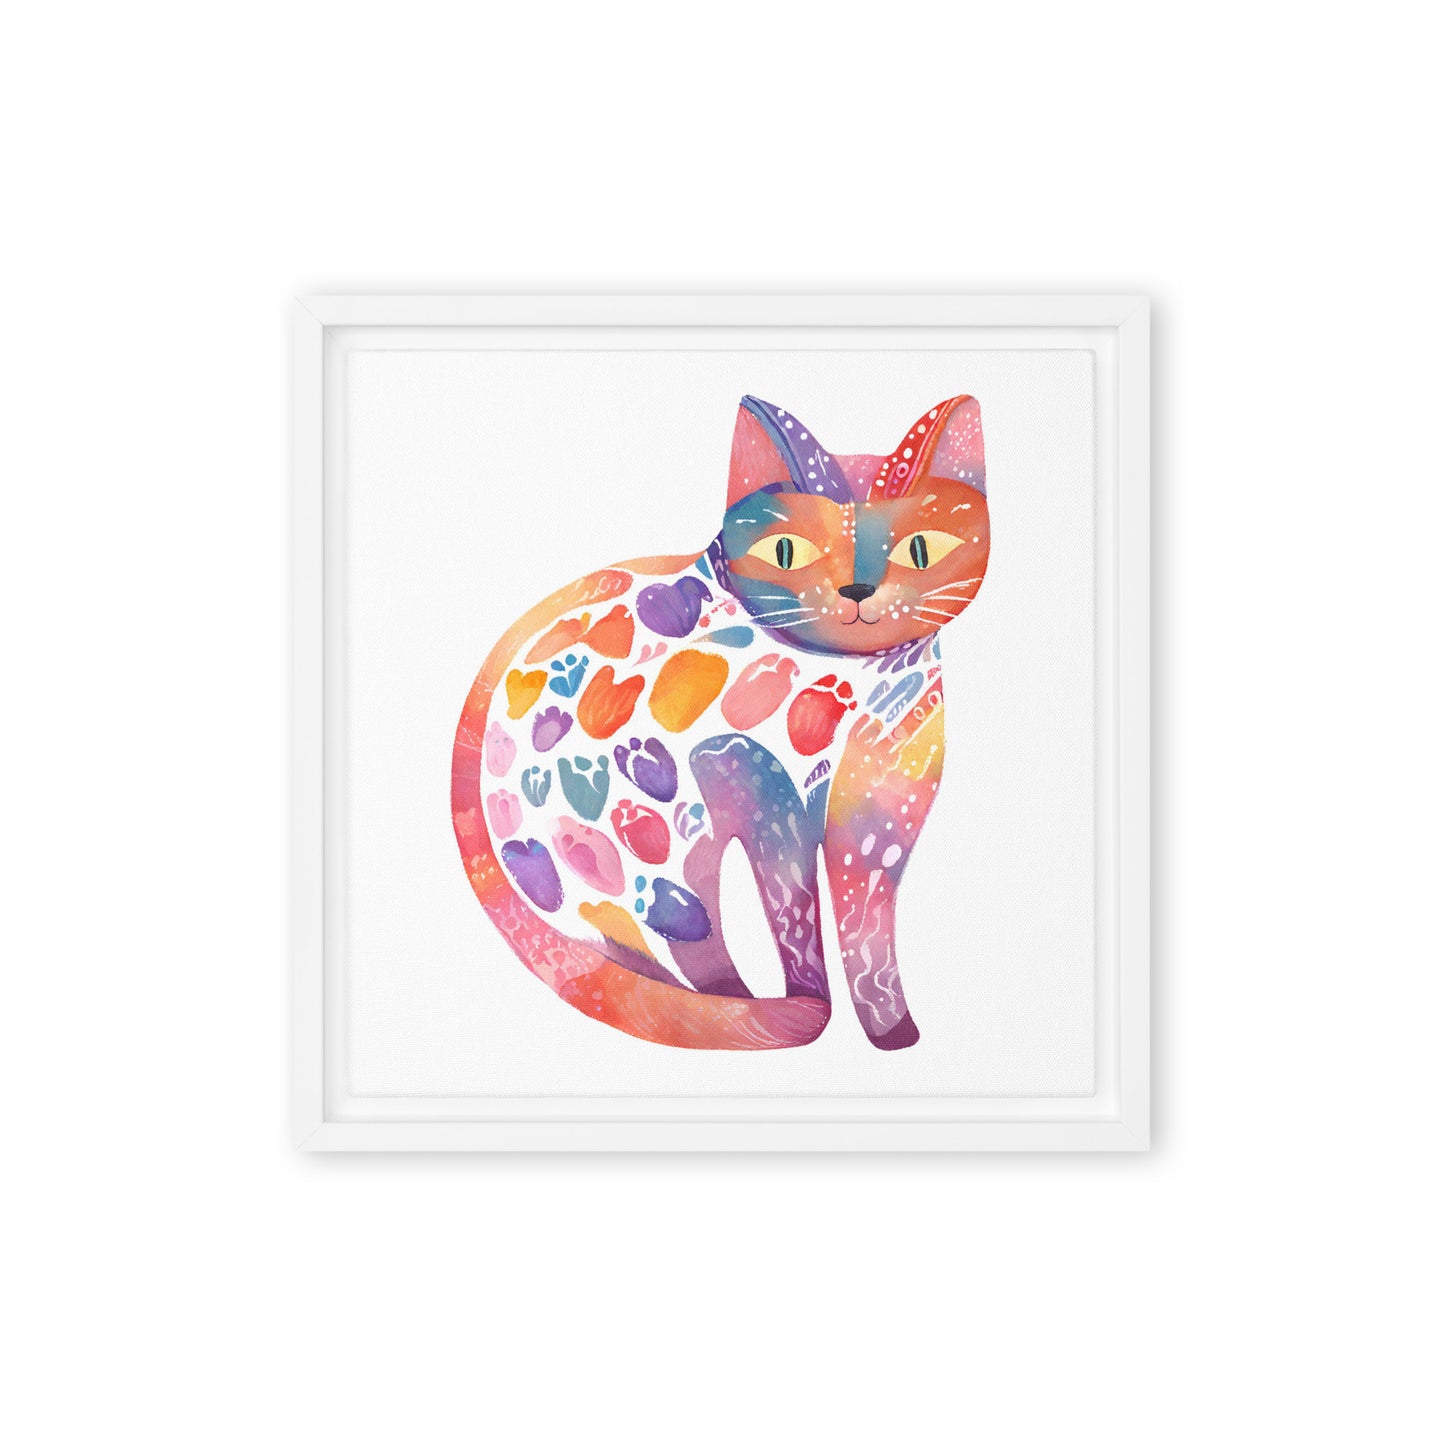 Meaw in colors - Framed canvas